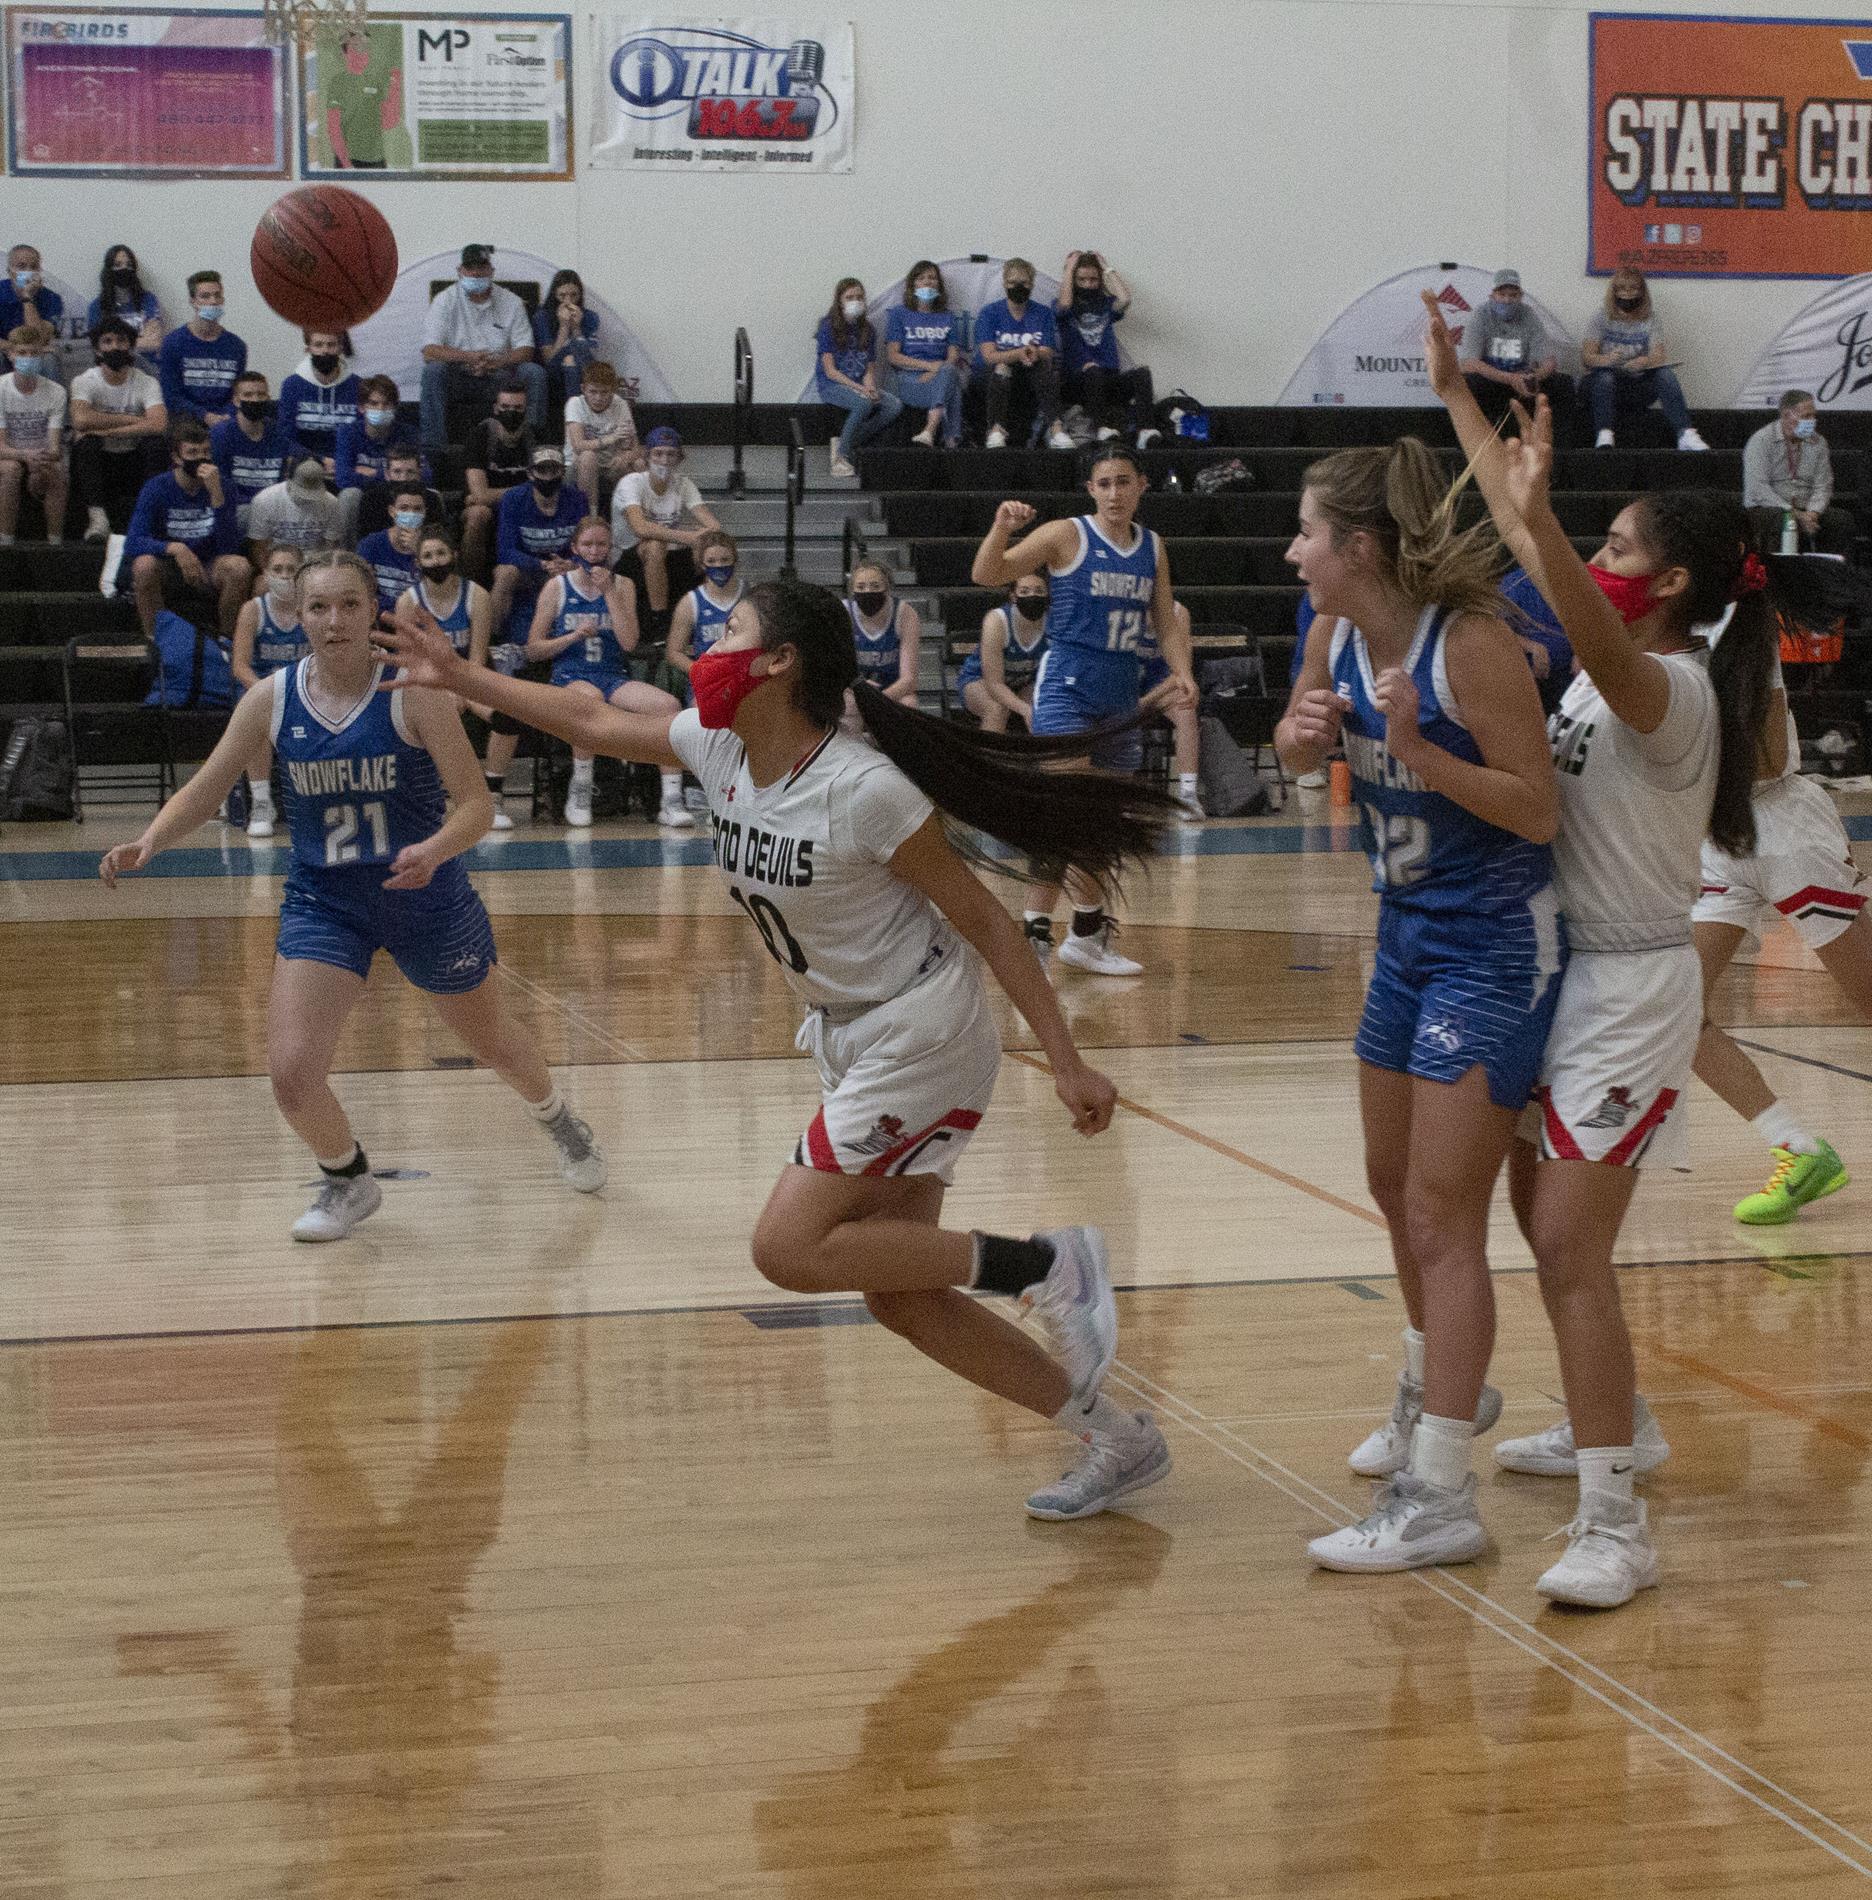 Neve chasing down a basketball